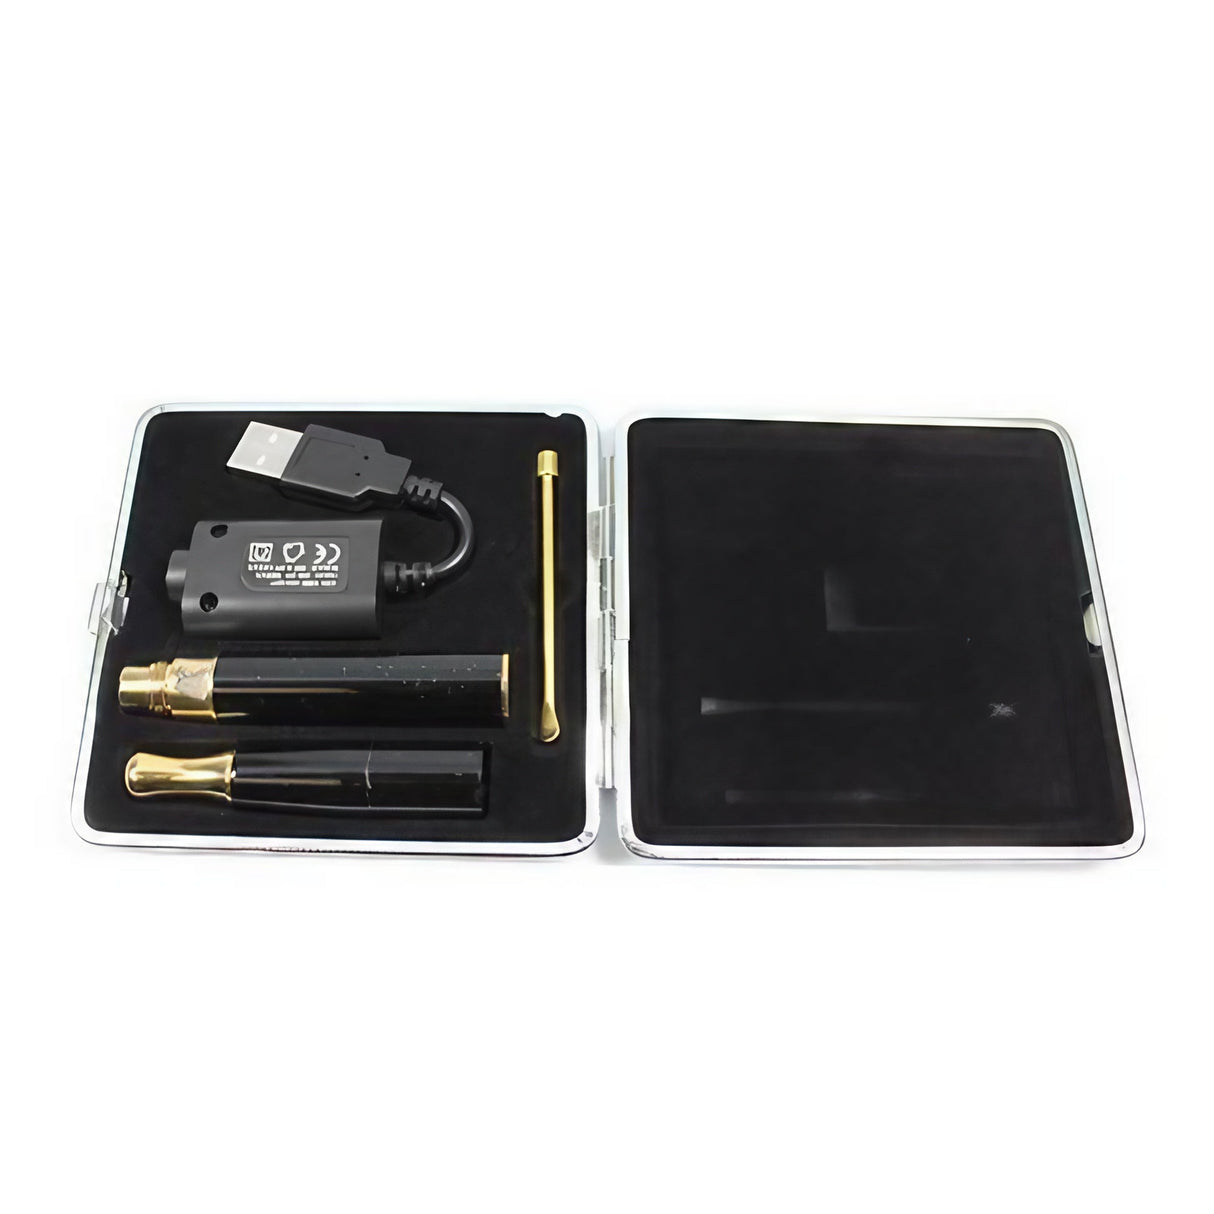 KandyPens Galaxy Vape Kit with USB Charger and Accessories in Open Case - Top View